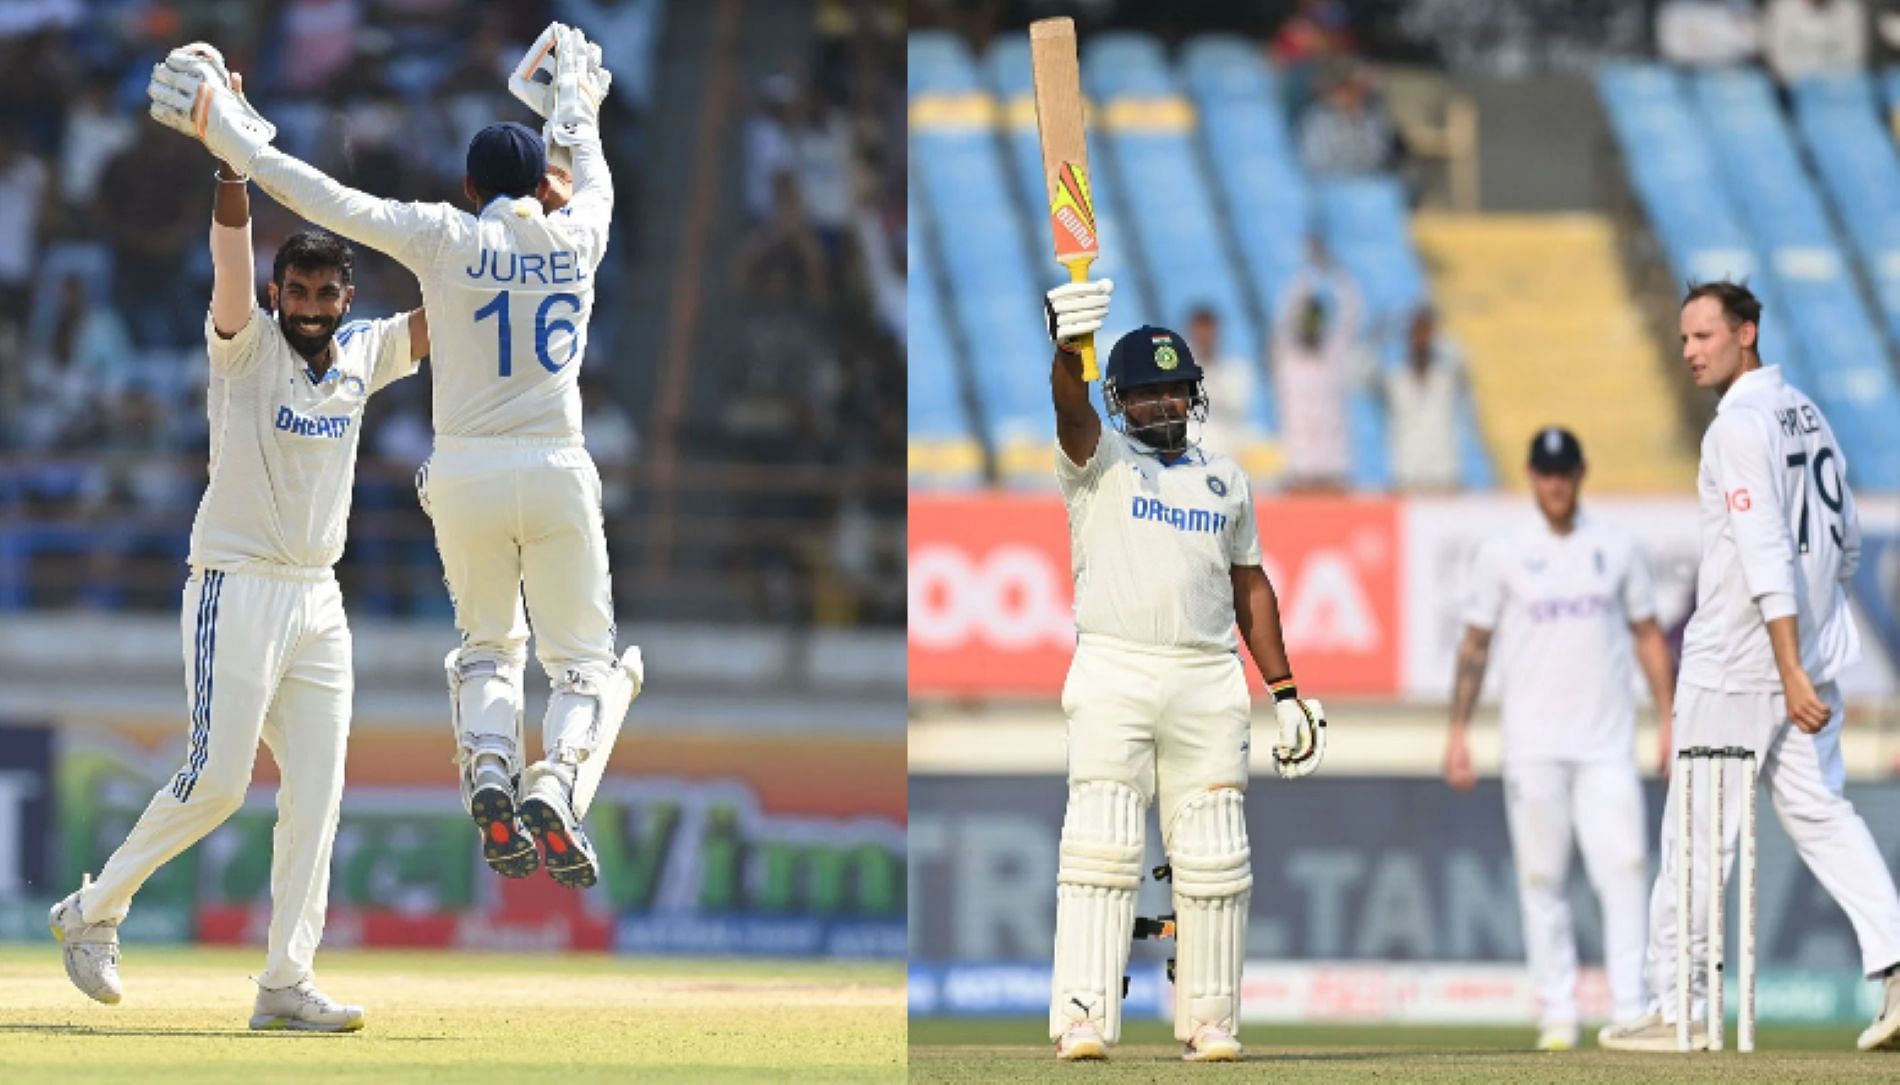 Both debutants had a Test match to remember during India